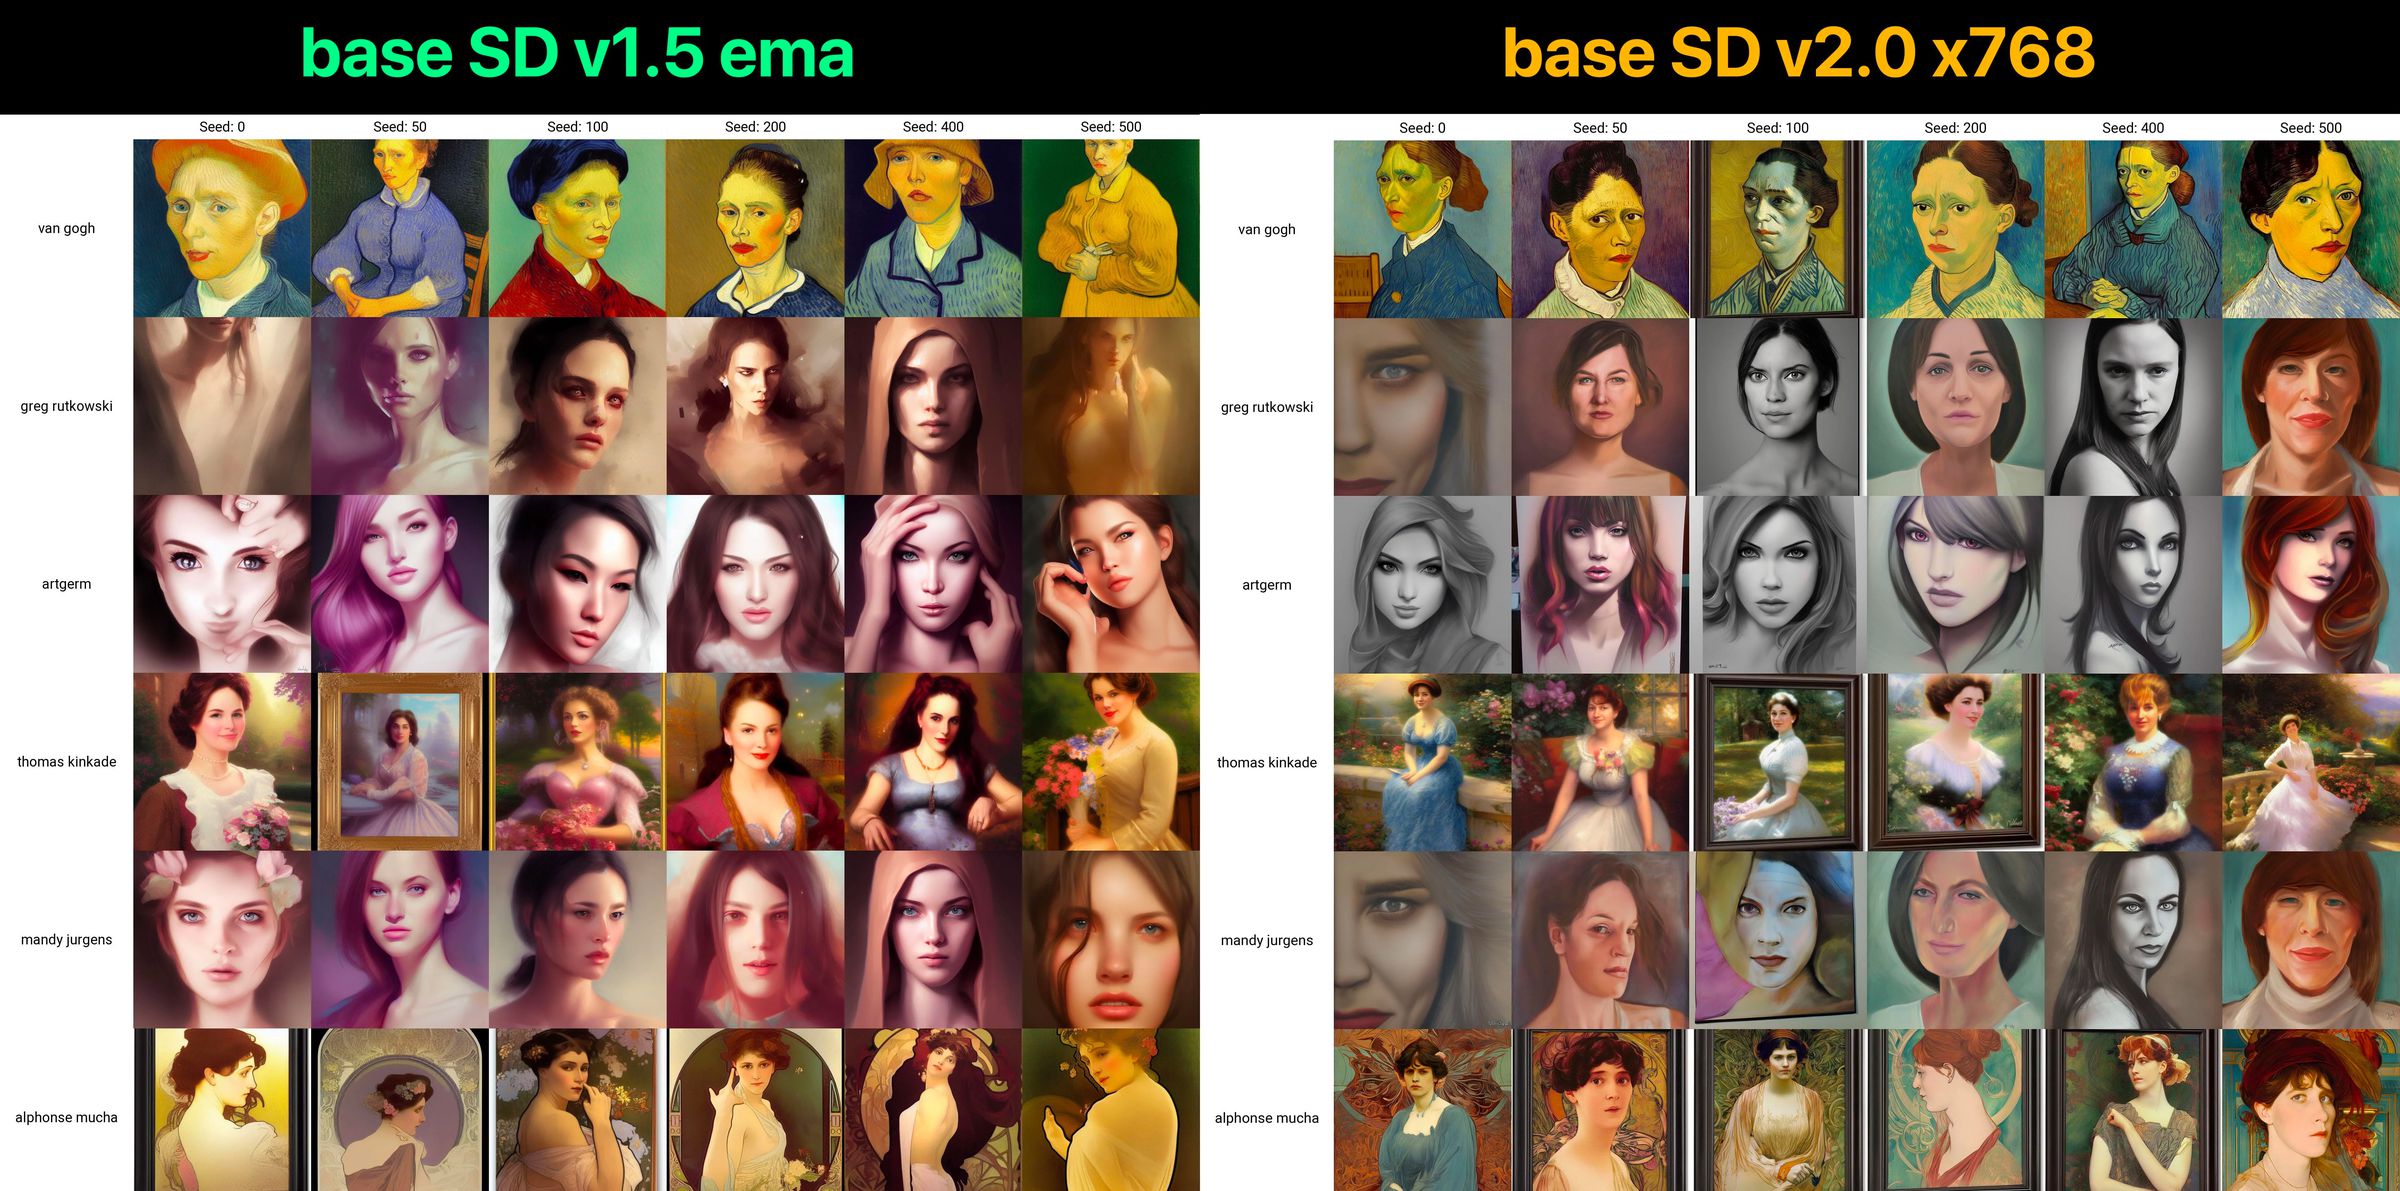 A grid of images showing a side-by-side comparison of AI-generated artwork created using different versions of Stable Diffusion.